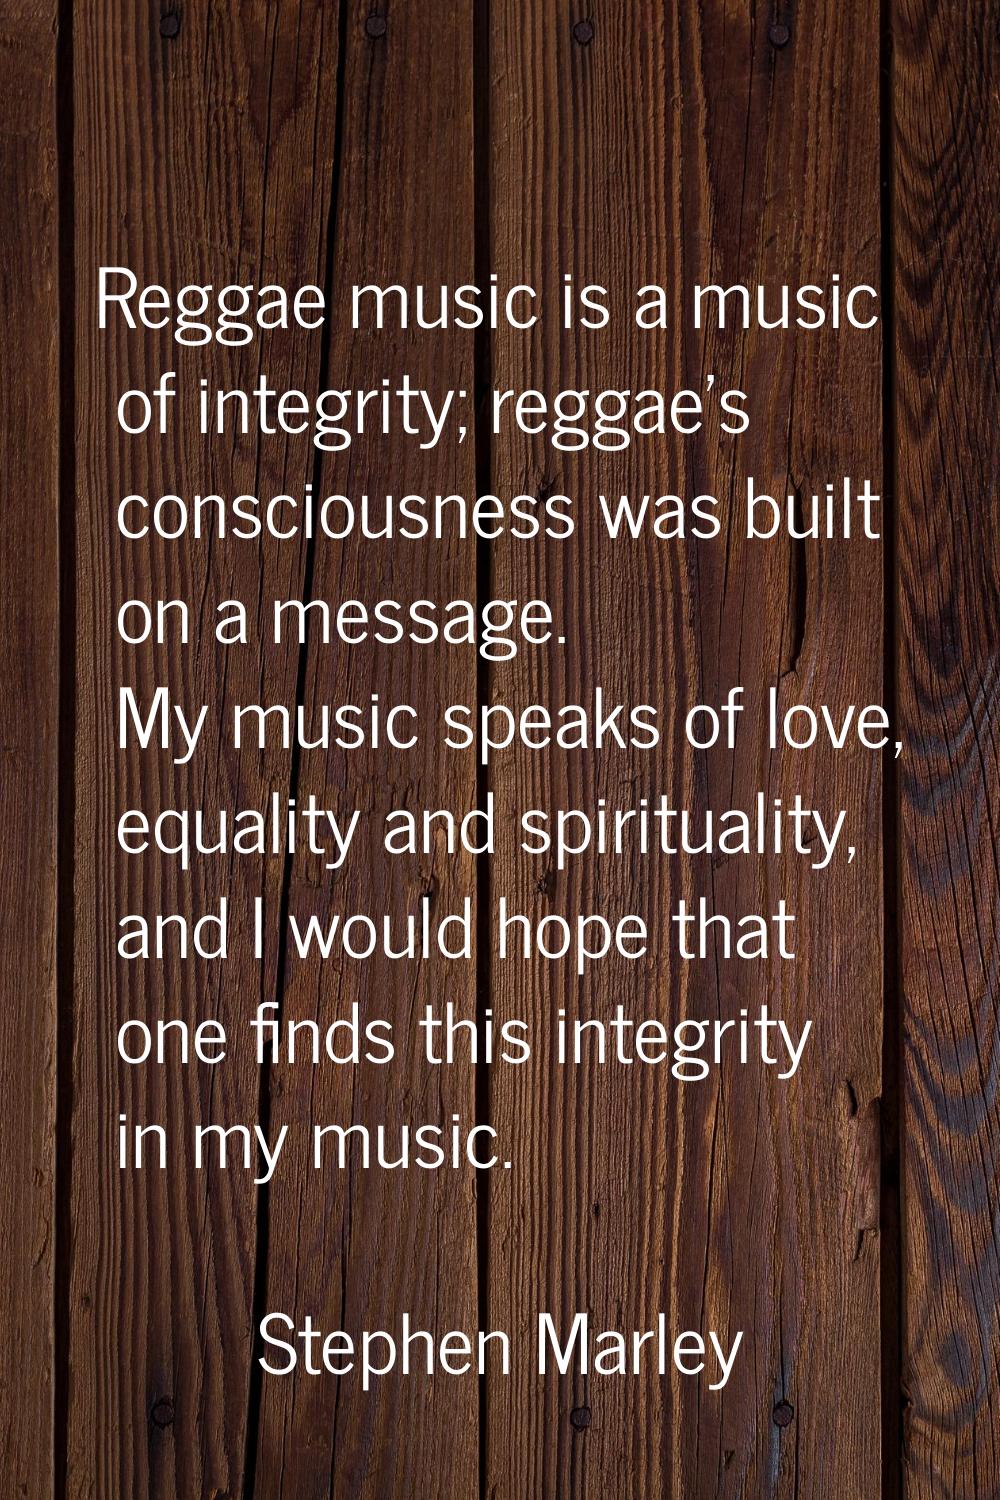 Reggae music is a music of integrity; reggae's consciousness was built on a message. My music speak